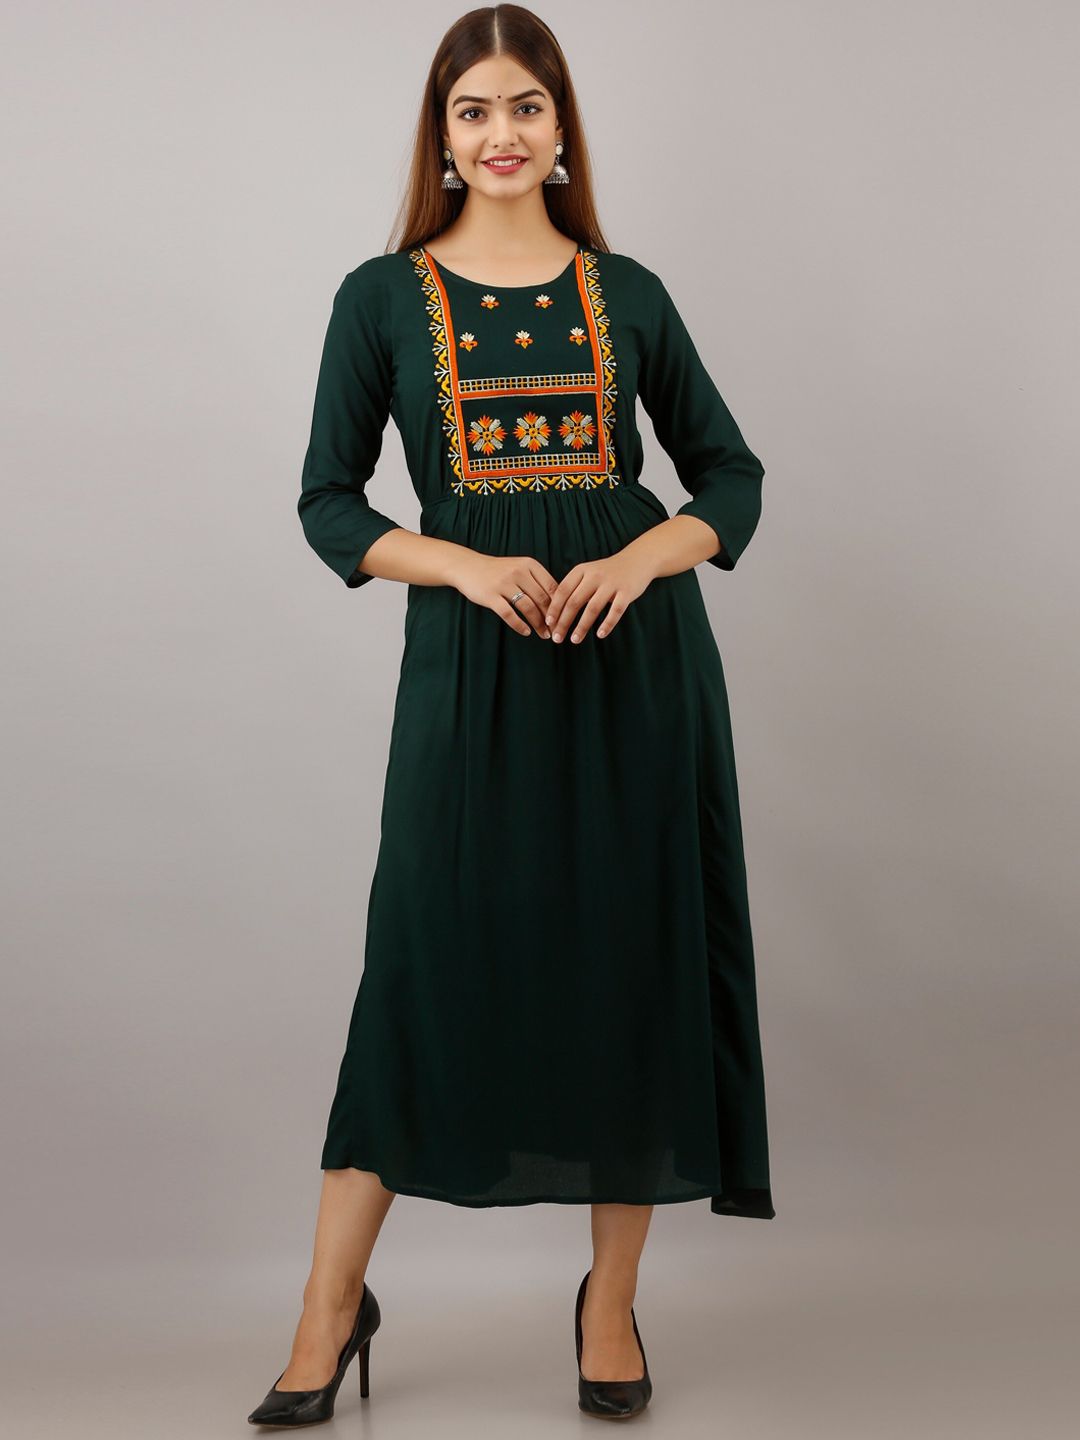 Women Touch Green & Orange Floral Embroidered A-Line Midi Dress Price in India